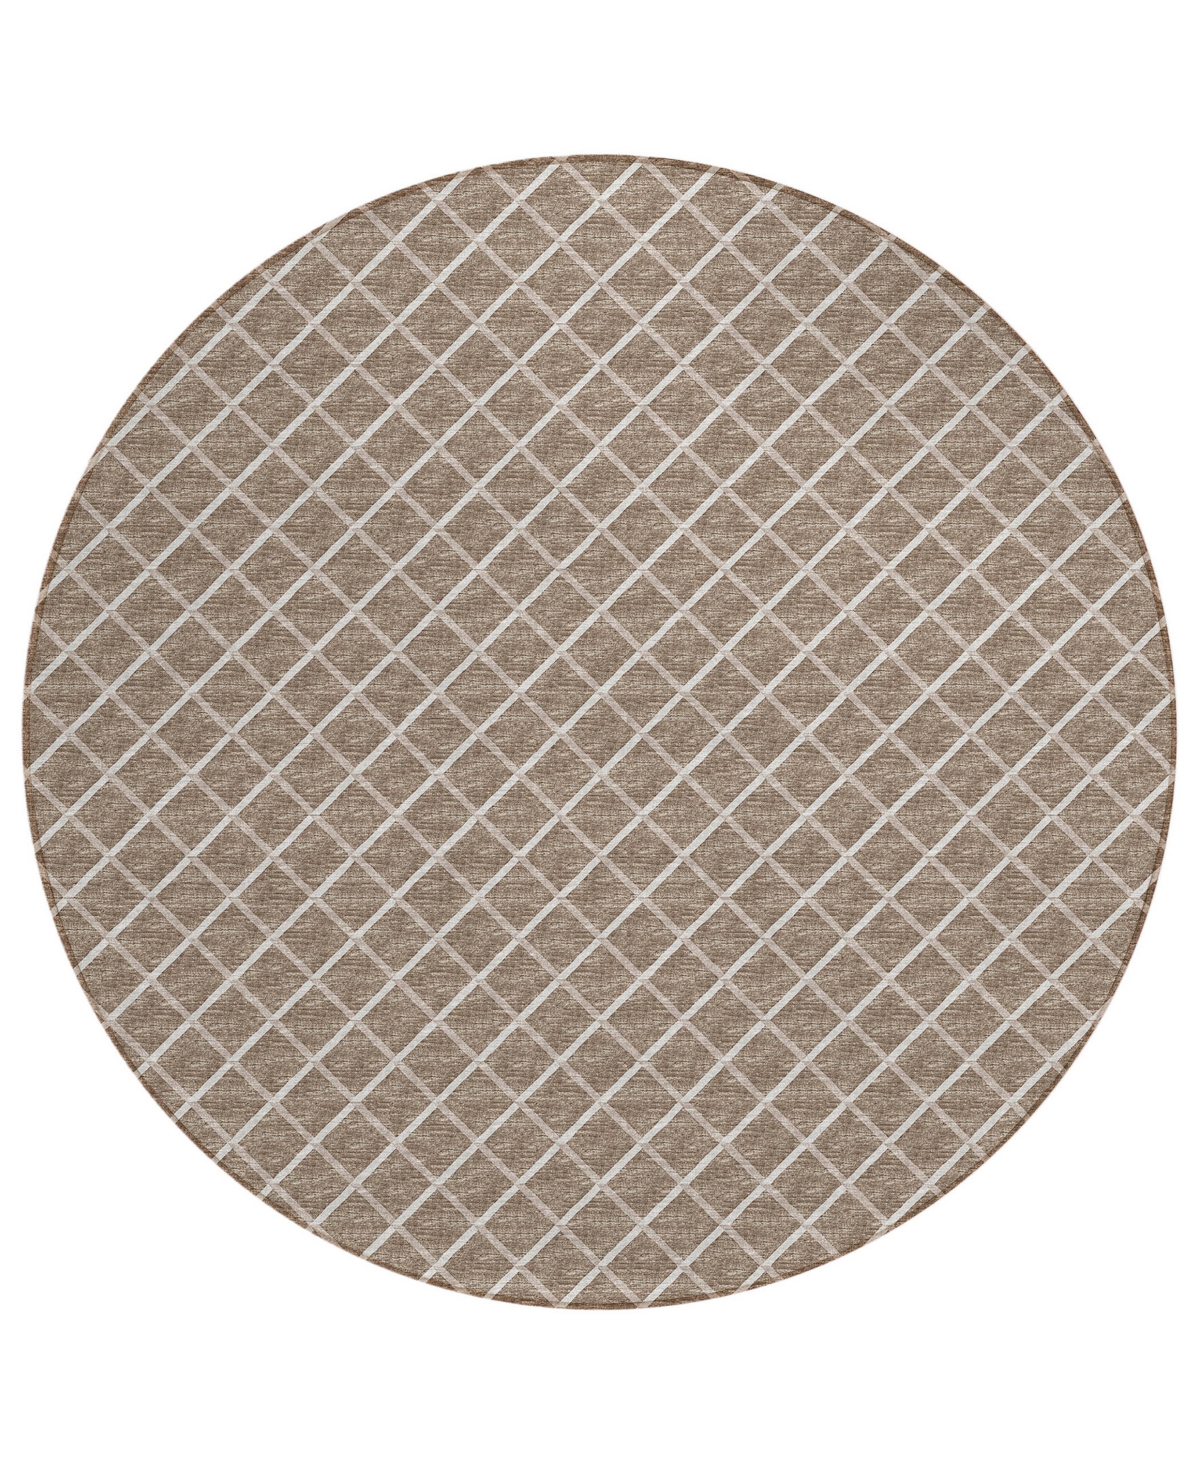 D Style Victory Washable VCY1 10' x 10' Round Area Rug - Taupe